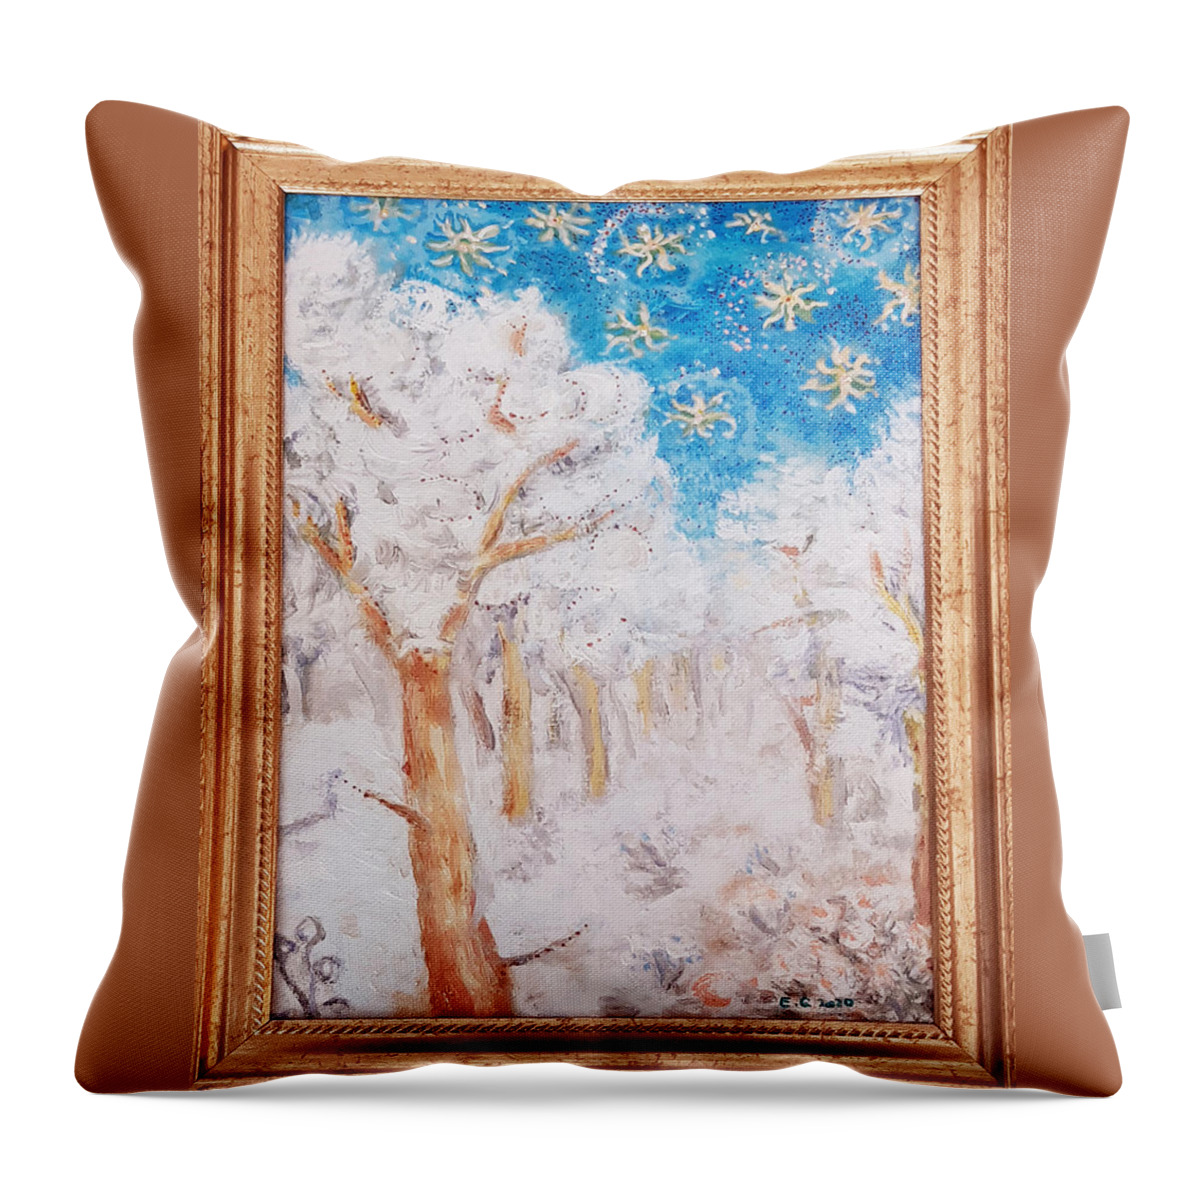 Winter Oil Landscape In A Golden Frame. Throw Pillow featuring the painting Winter oil landscape in a golden frame. by Elzbieta Goszczycka